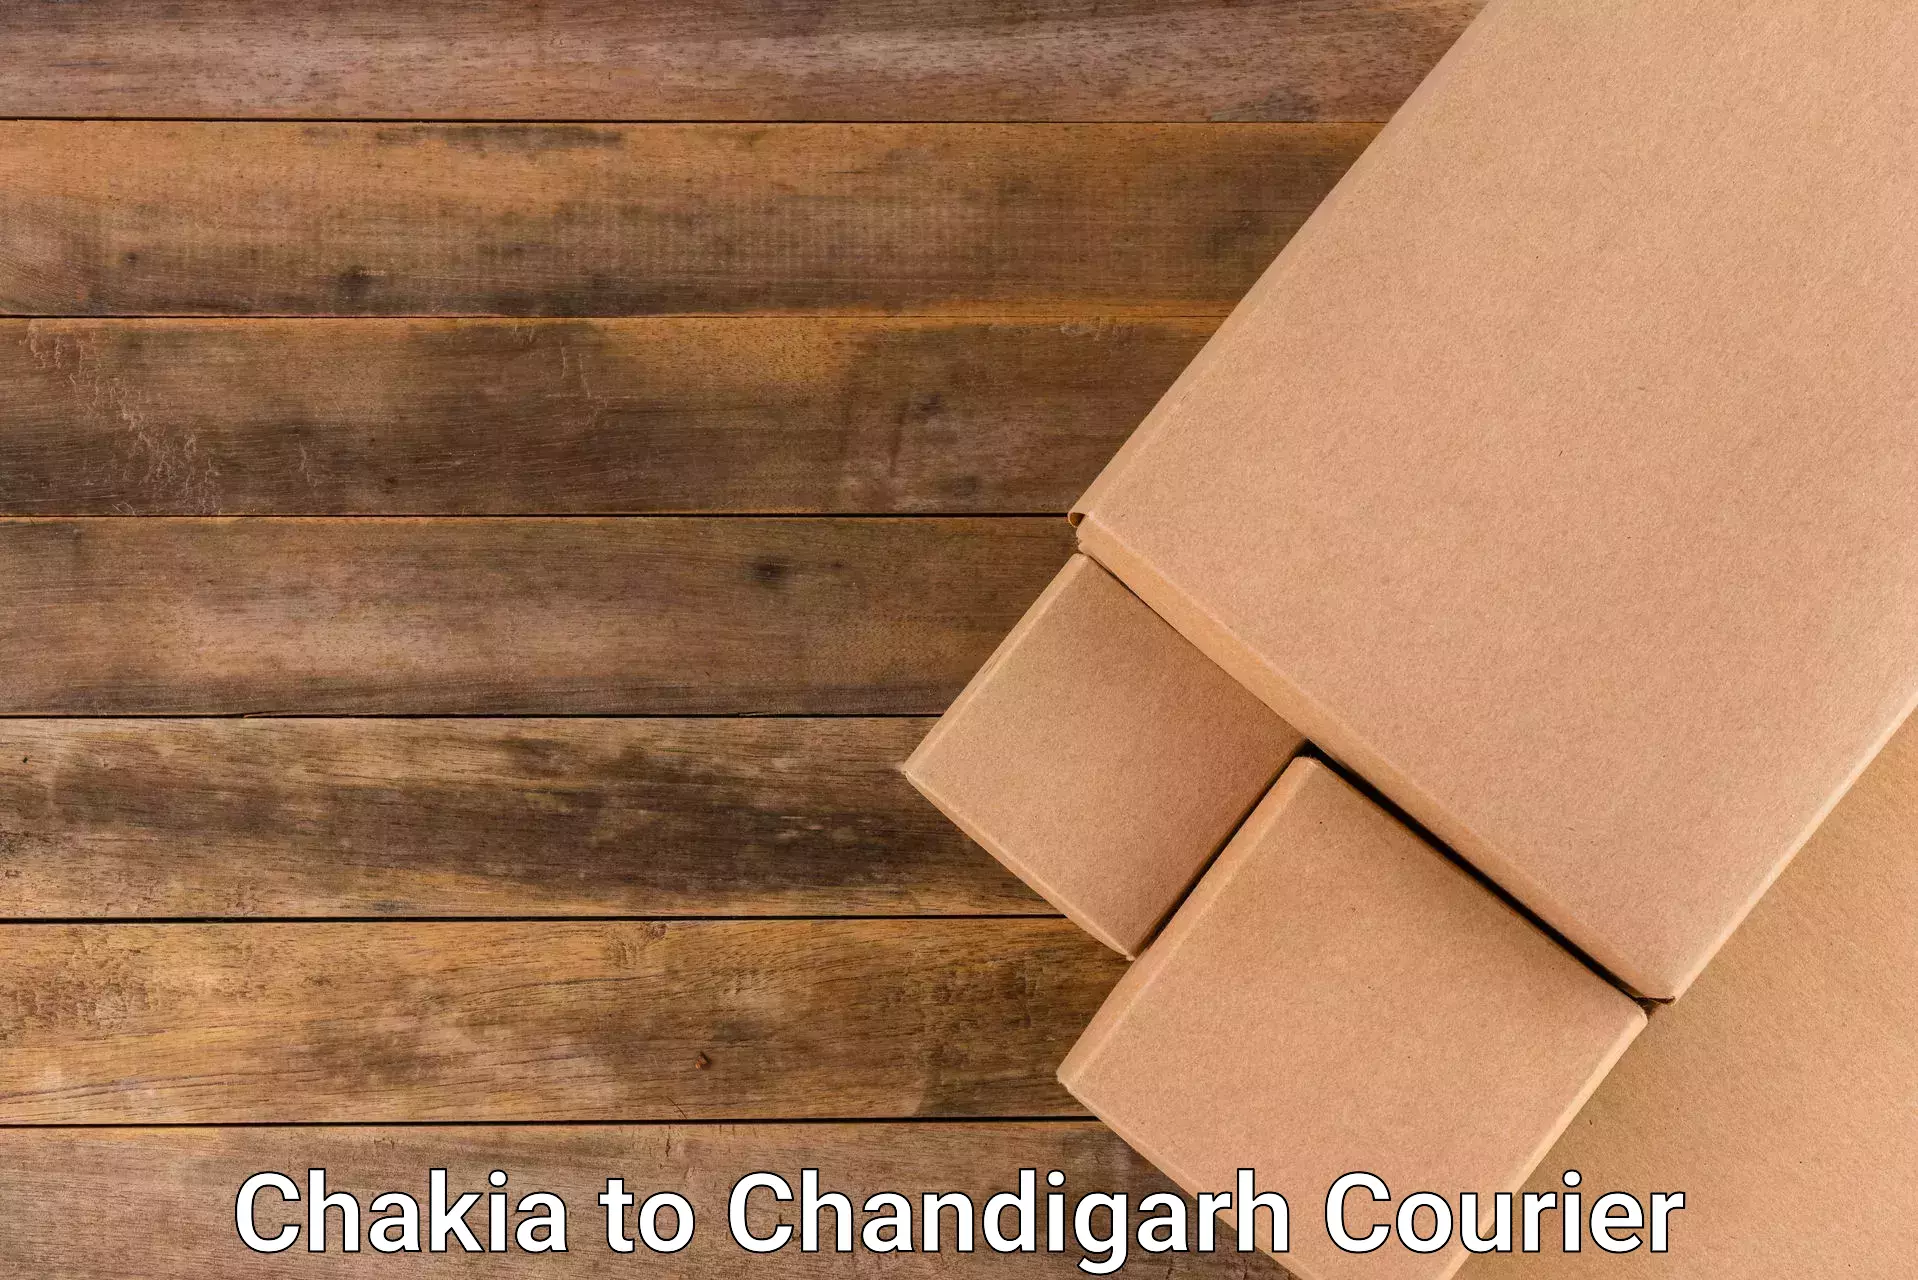 Advanced delivery network Chakia to Chandigarh